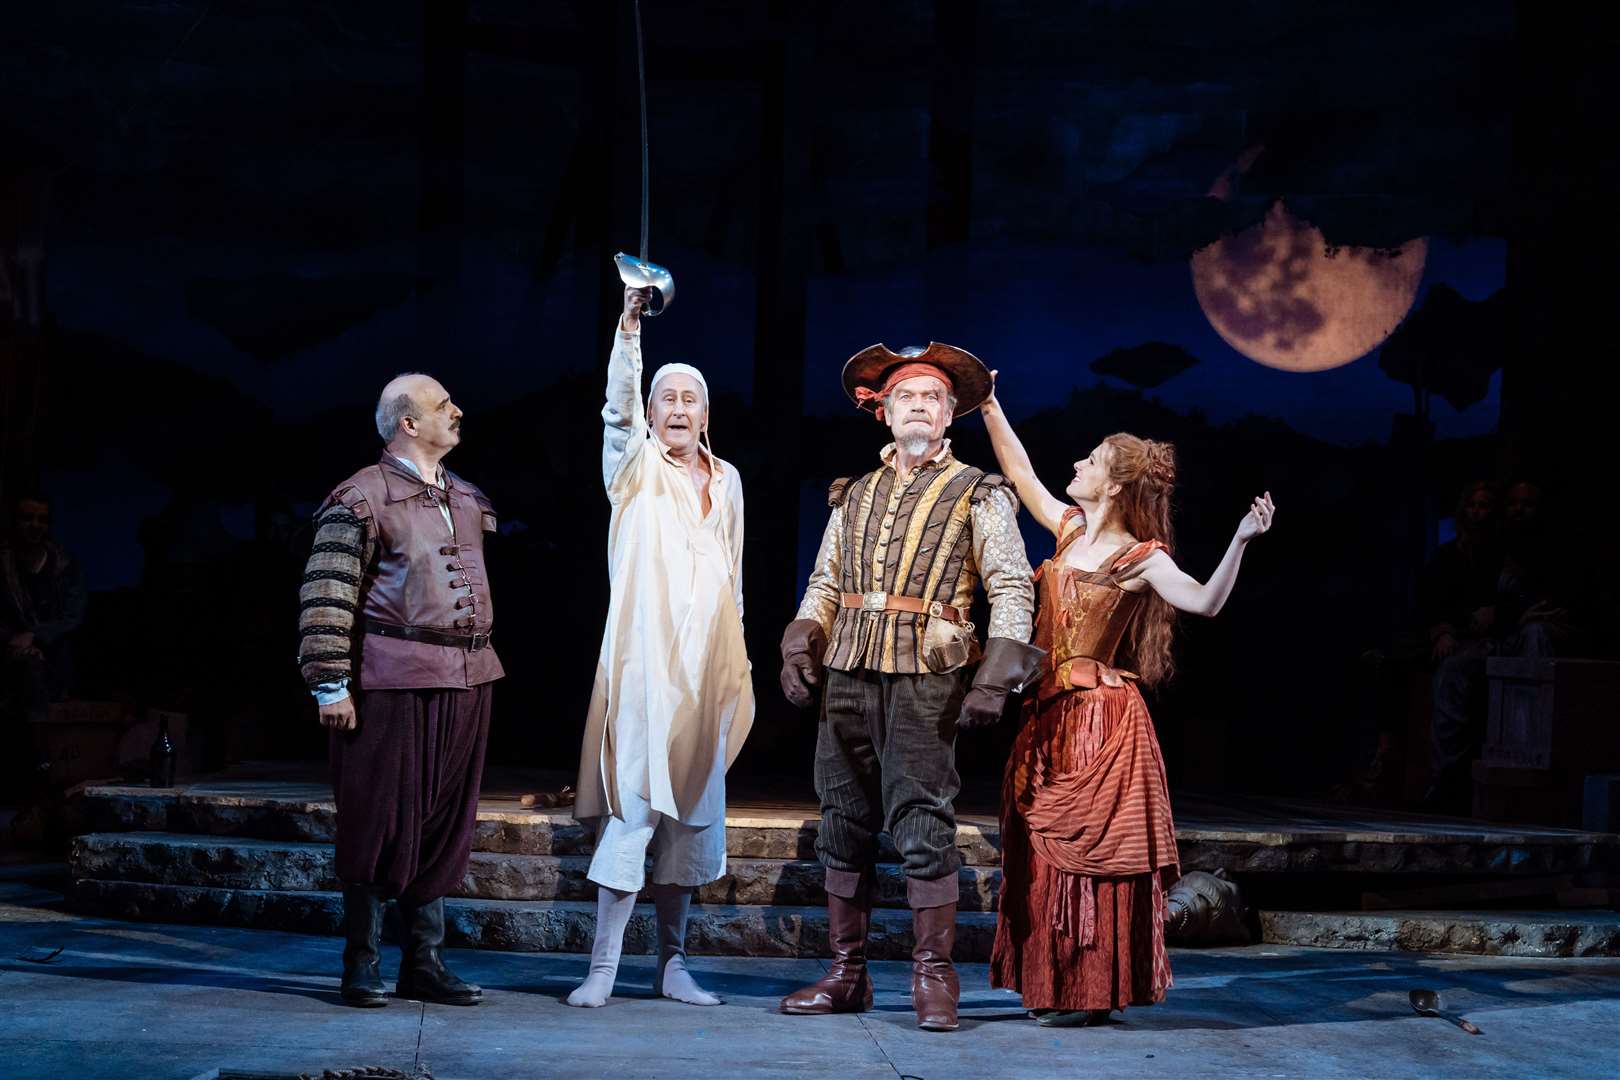 Peter Polycarpou, Nicholas Lyndhurst, Kelsey Grammer and Cassidy Janson in one of the lighter moments from the musical